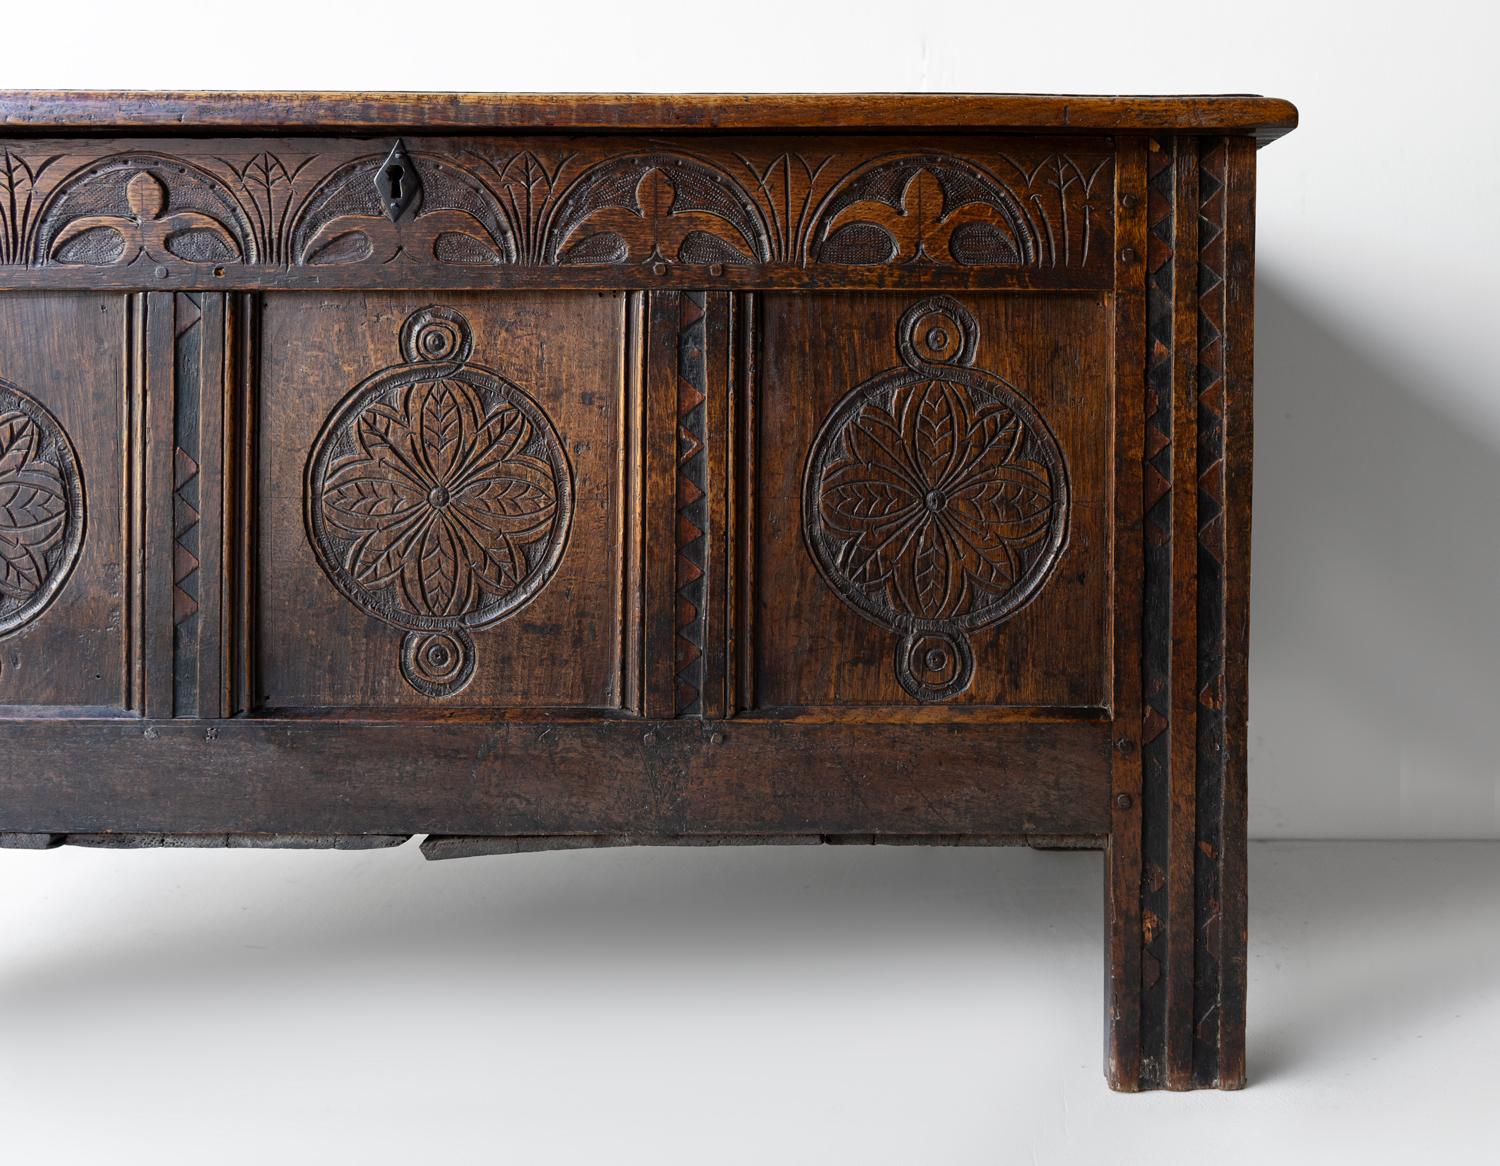 Antique Charles II West Country Carved Oak Coffer 17th Century Blanket Box Chest For Sale 2